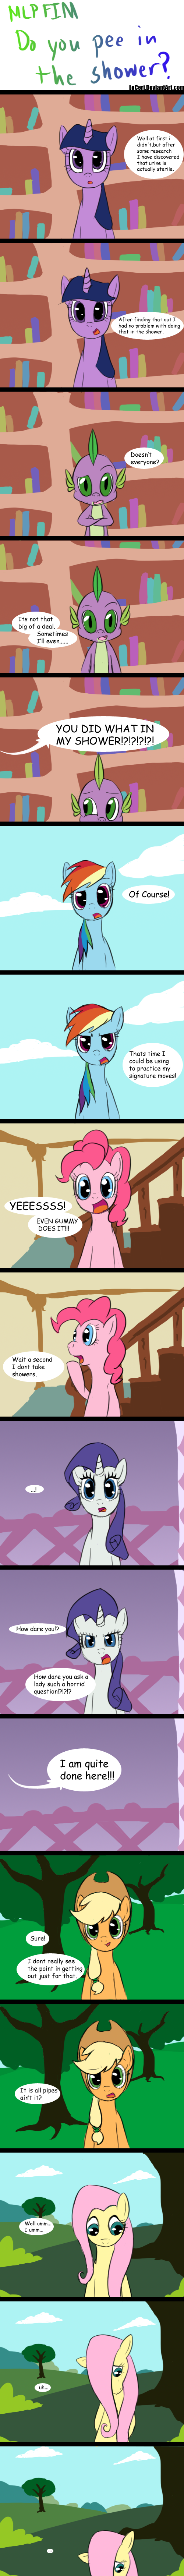 mlp_do_you_pee_in_the_shower__by_loceri-d47ji06.png